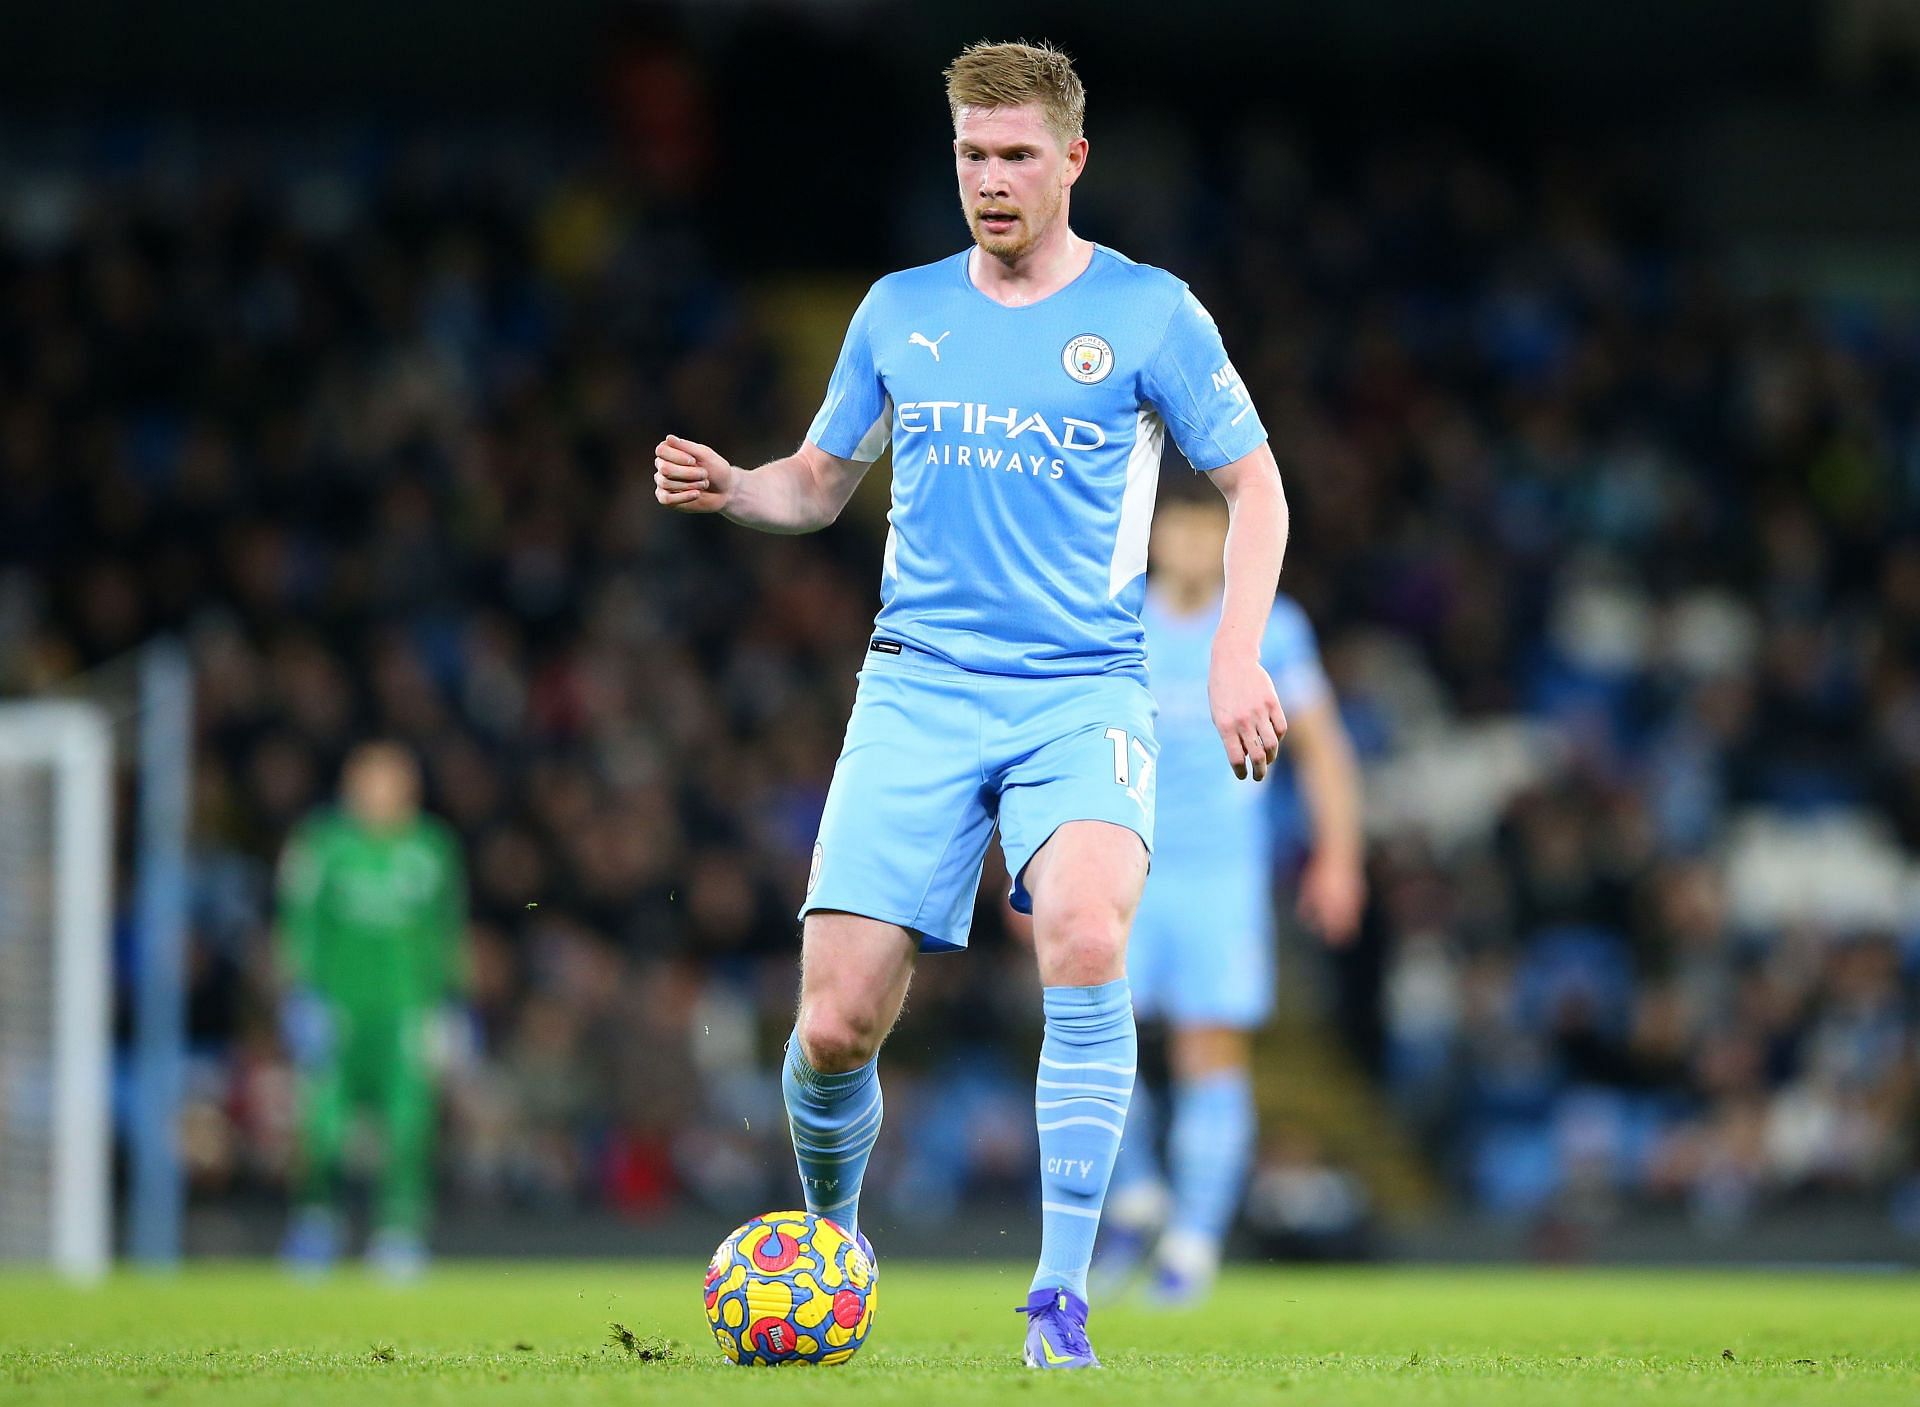 De Bruyne was subdued last season but still displayed his brilliance when called upon, which earned him a spot in the FIFPro shortlist.